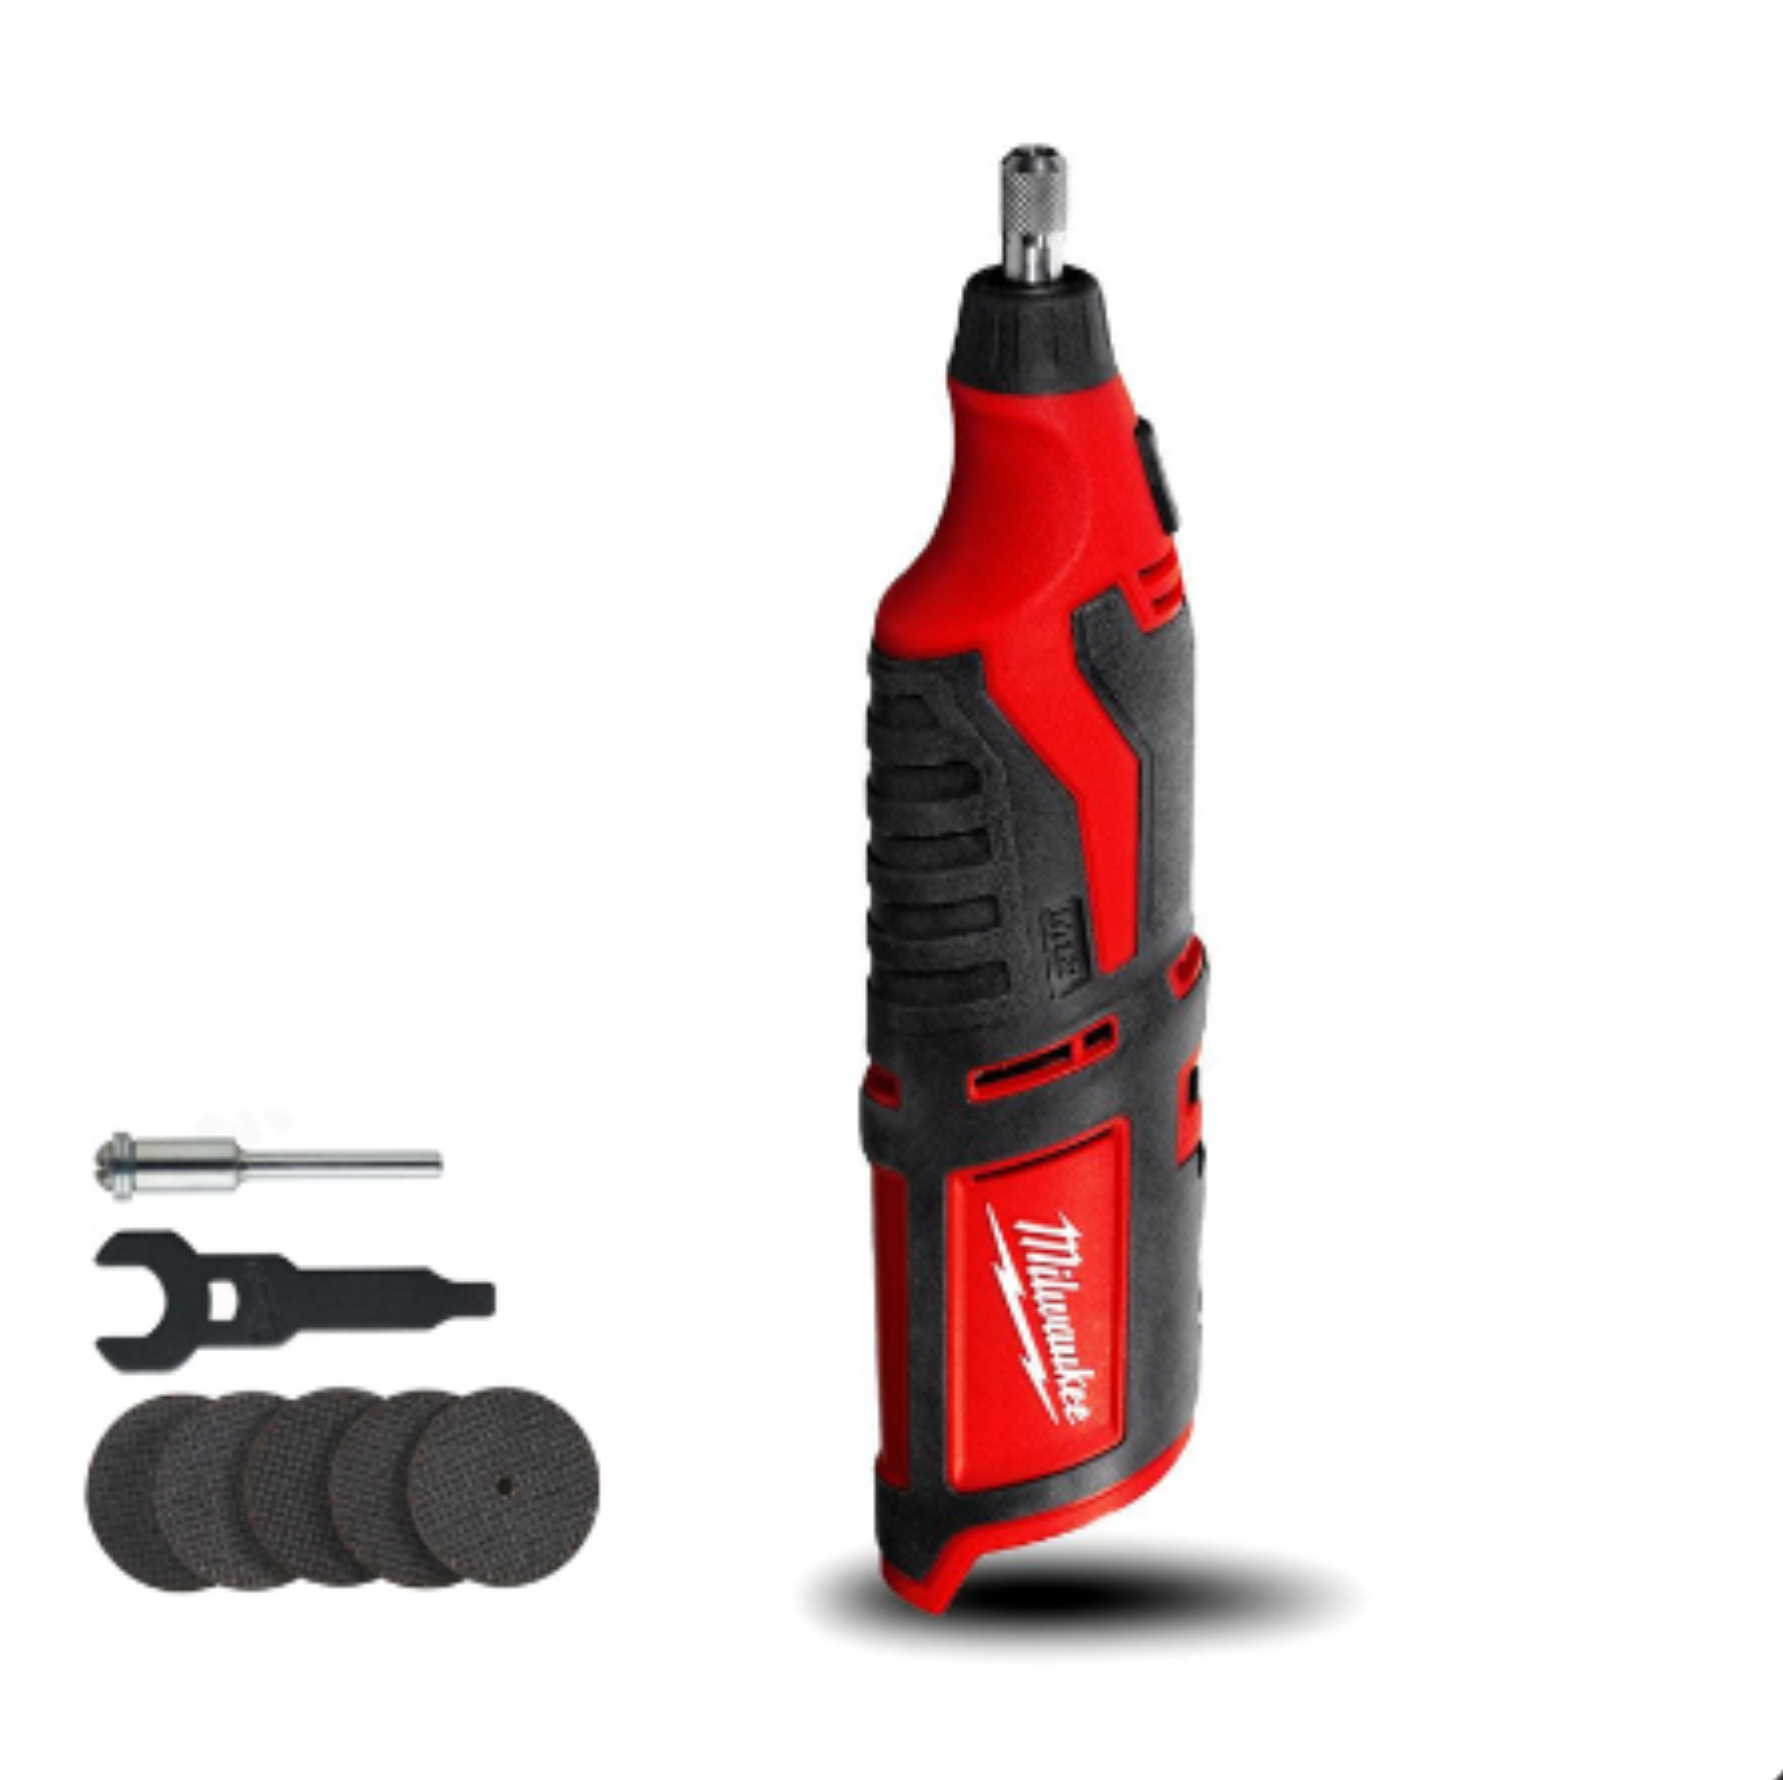 MILWAUKEE M12 12V Compact Rotary MULTI-TOOL 3.2MM Collet With Variable Speed Control C12RT-0 BARE UNIT